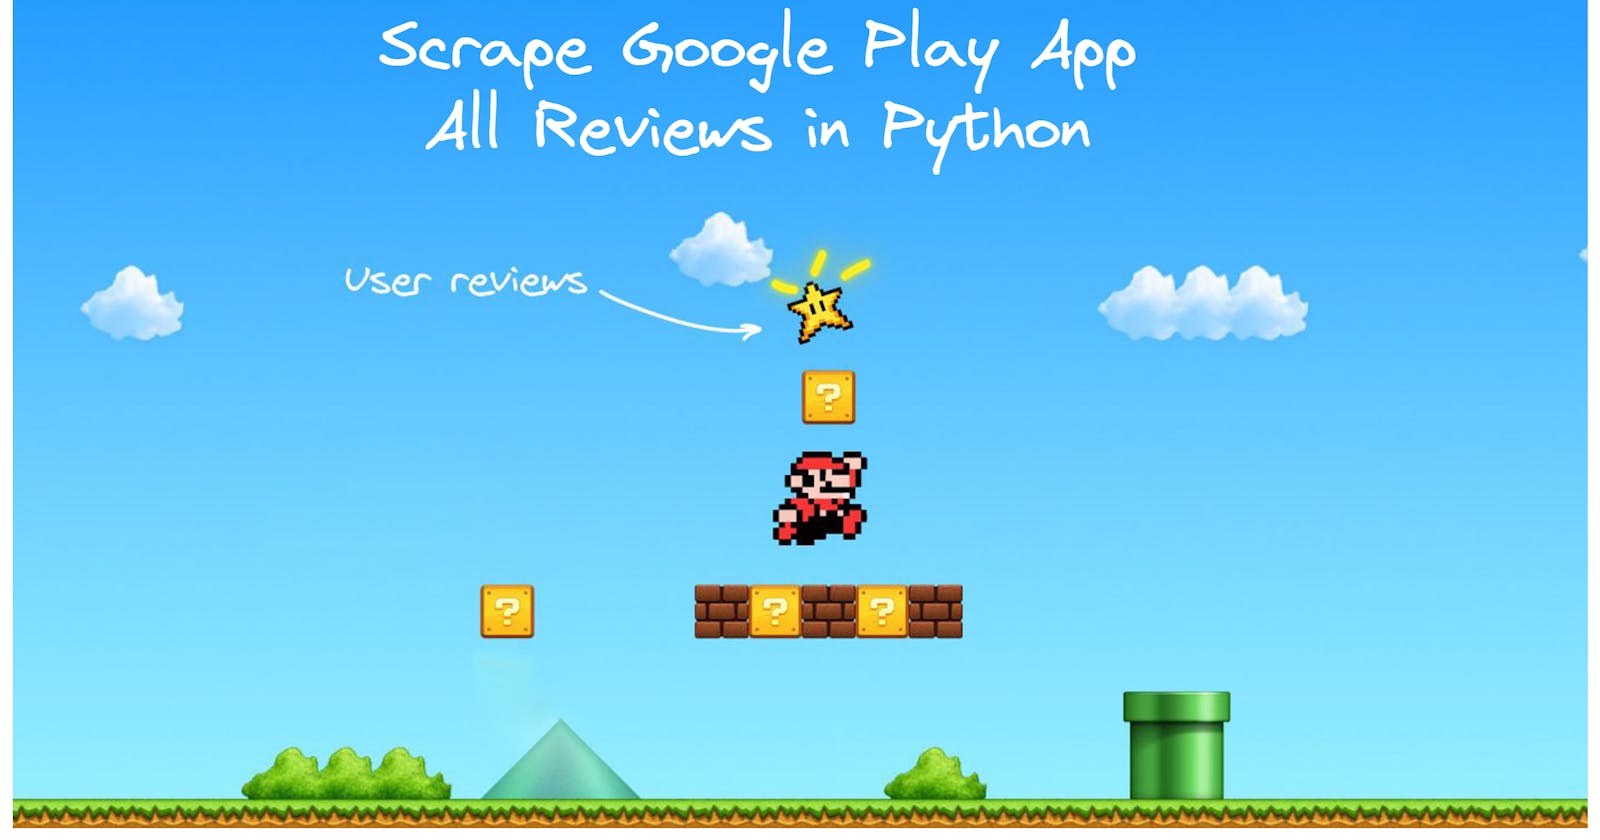 Web Scraping All Google Play App Reviews in Python